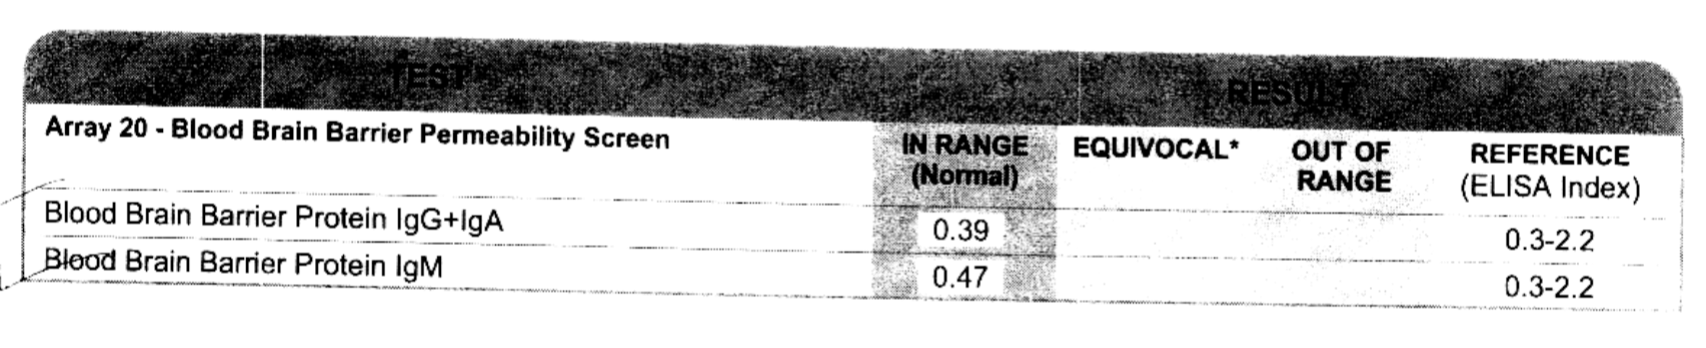 My results from the Cyrex Labs Array 20 test (called the Blood Brain Barrier Permeability Screen), which was negative. This is good news because leaky gut and leaky brain often co-exist.